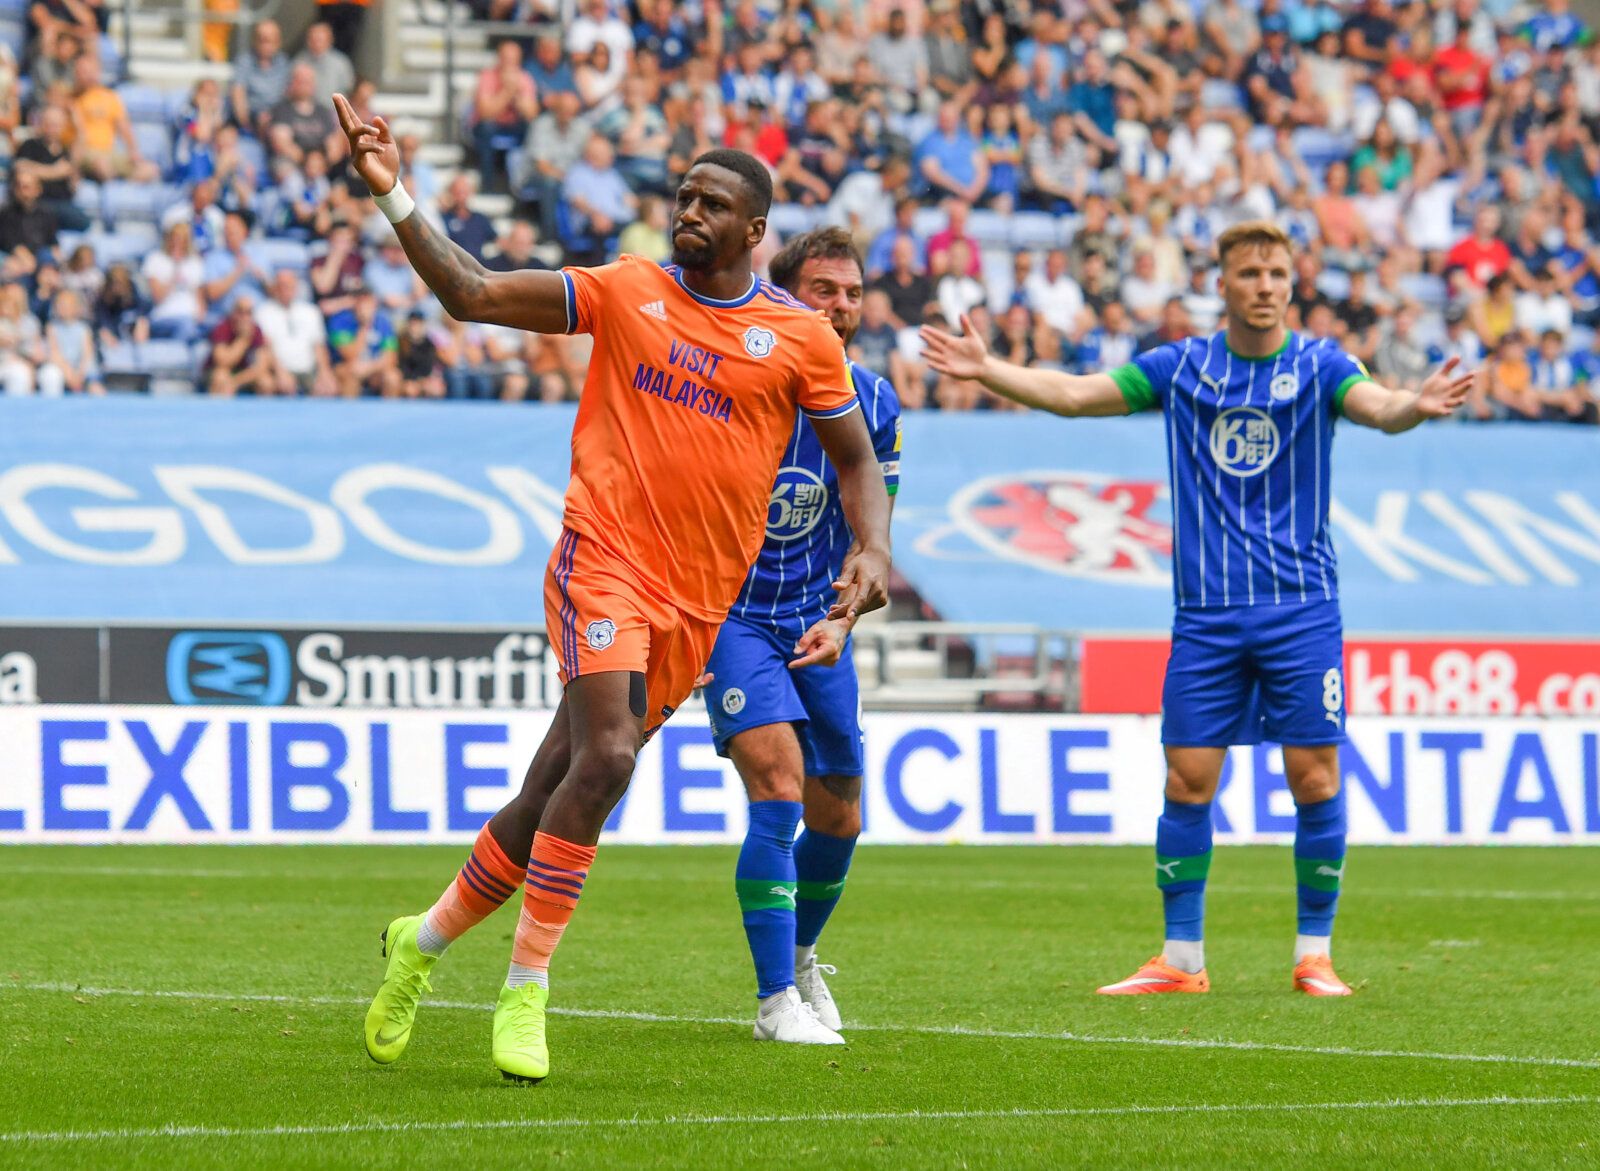 Soccer Football - Championship - Wigan Athletic v Cardiff City - DW Stadium, Wigan, Britain - August 3, 2019   Cardiff City's Omar Bogle celebrates scoring their second goal    Action Images/Paul Burrows    EDITORIAL USE ONLY. No use with unauthorized audio, video, data, fixture lists, club/league logos or 